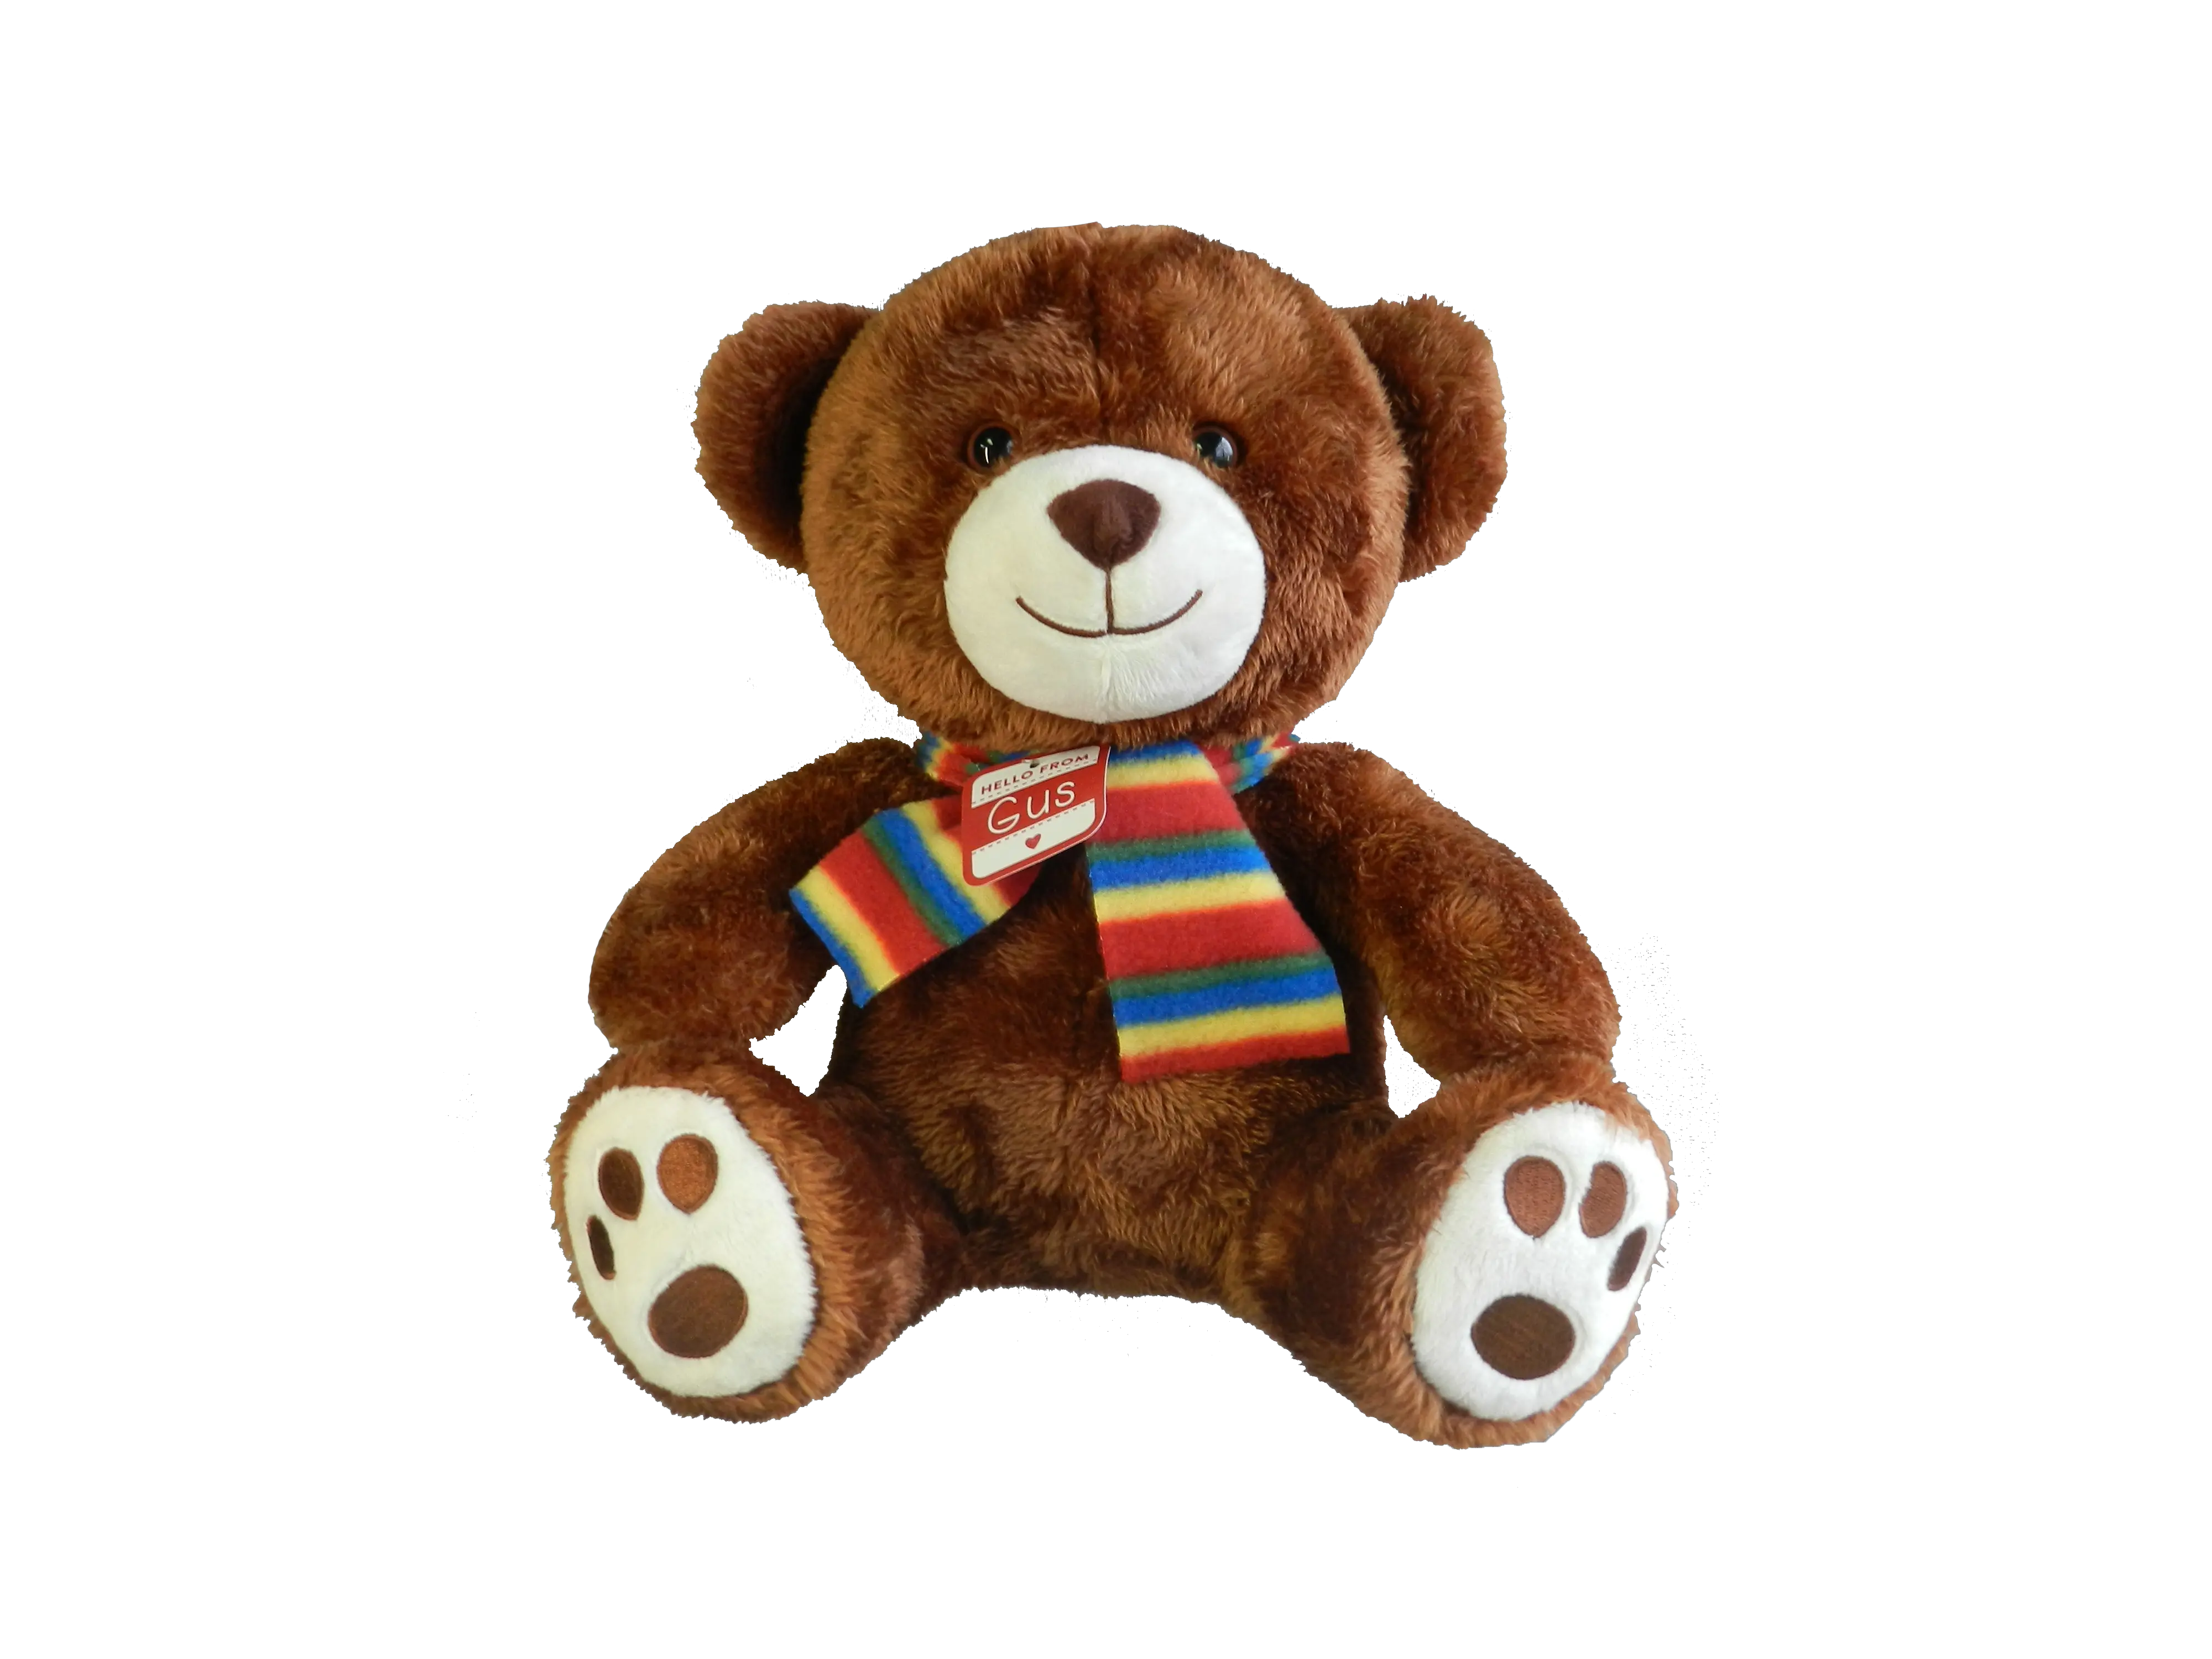 Download Hd Everest Paw Patrol Png Transparent Image Soft Teddy Bear Clipart Paw Patrol Png